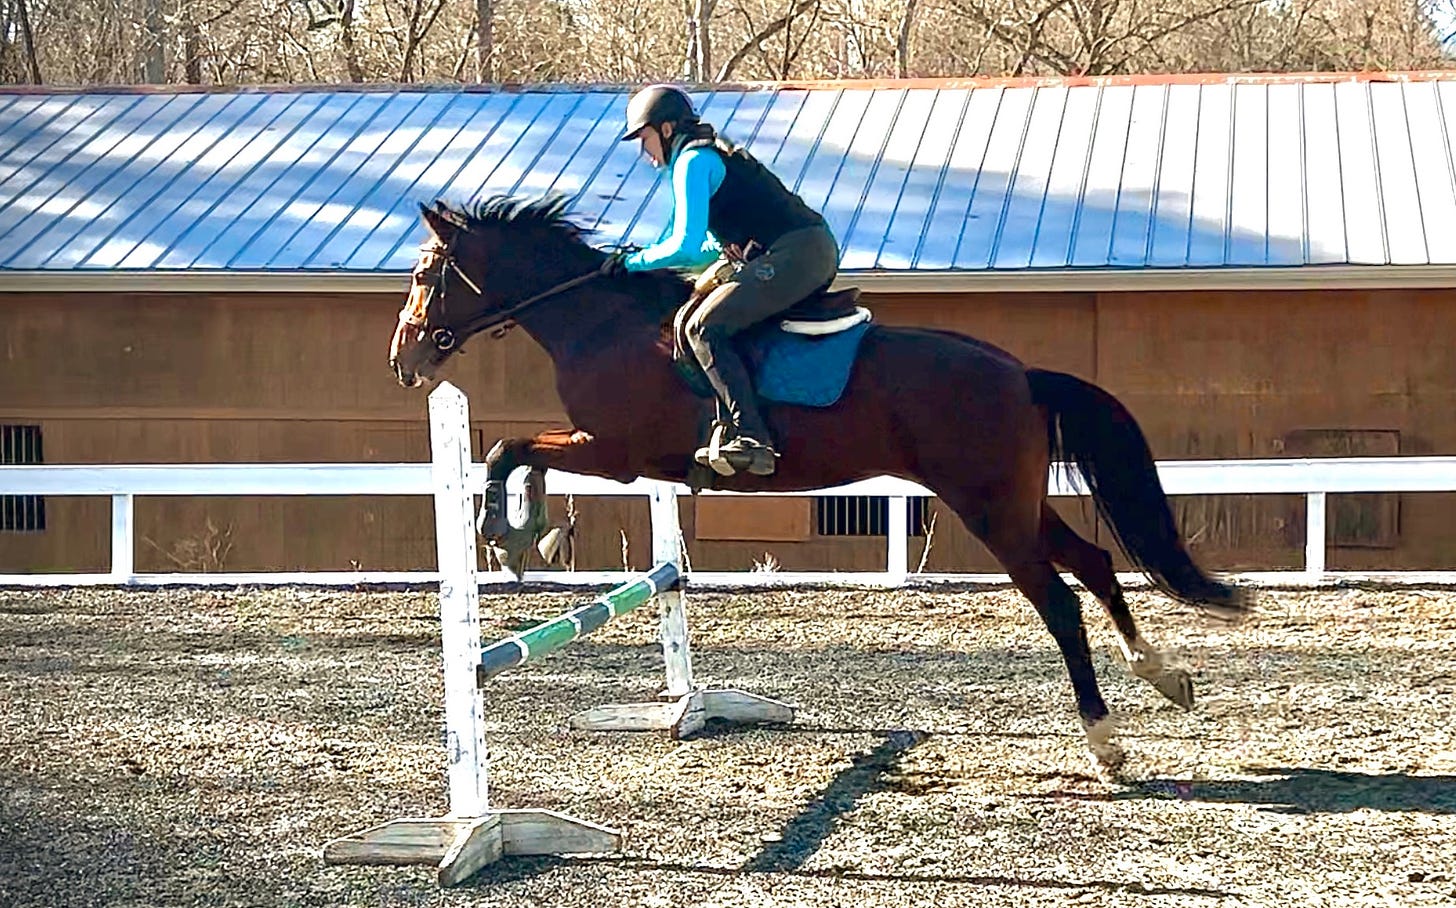 A bay horse jumping a 2'3" jump from a long distance, all four feet in the air, the rider is a white woman in a turquoise shirt.